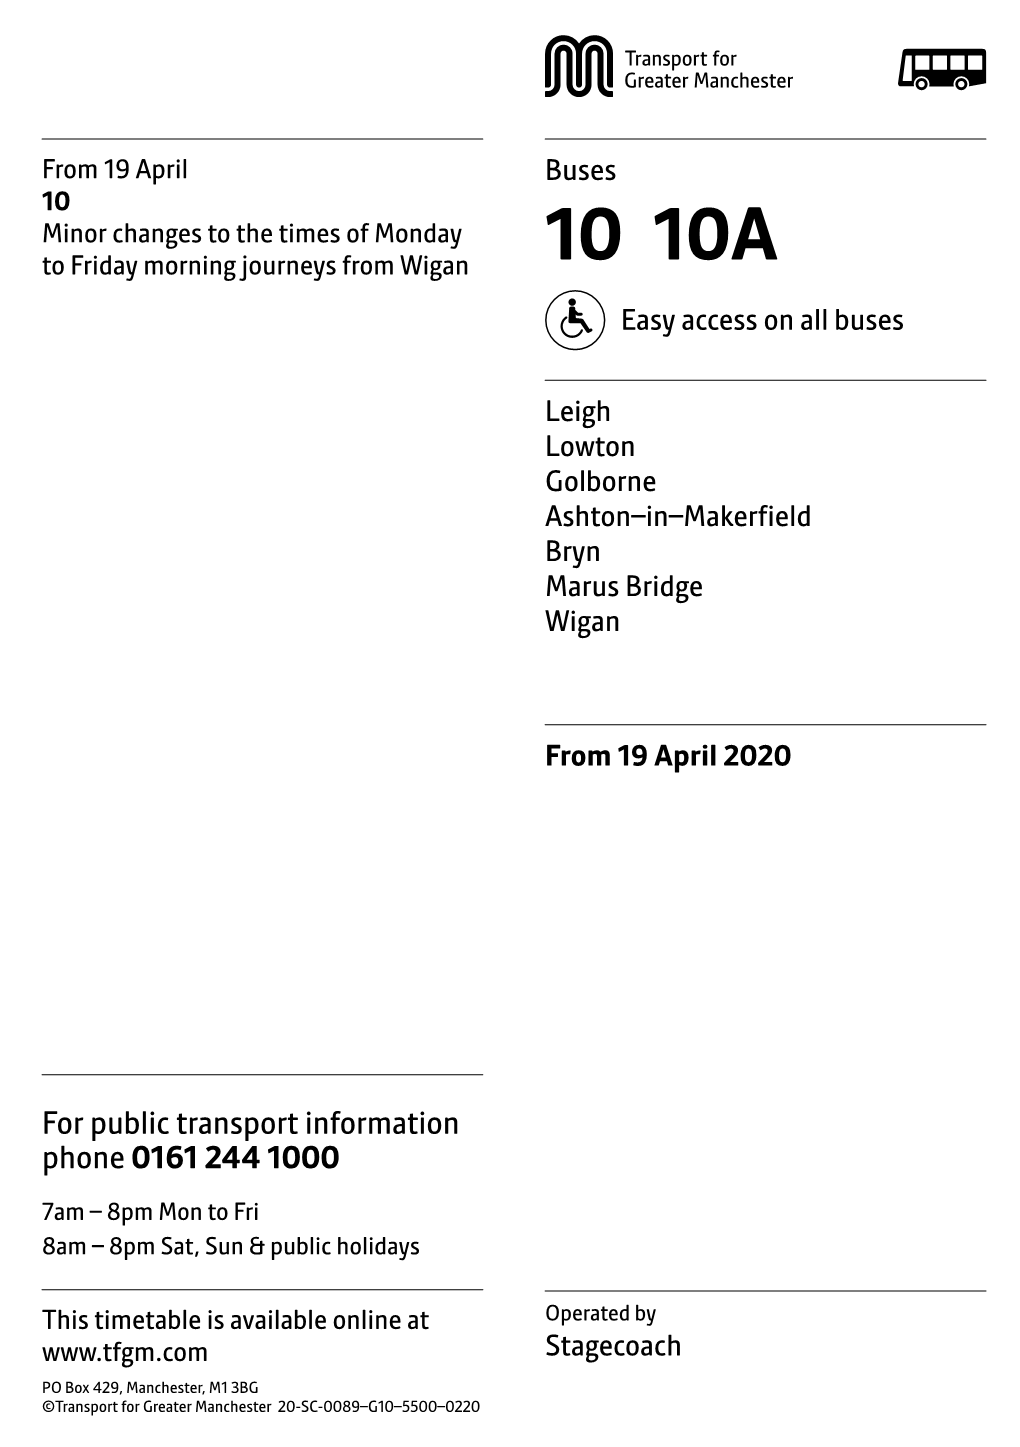 10 Minor Changes to the Times of Monday to Friday Morning Journeys from Wigan 10 10A Easy Access on All Buses